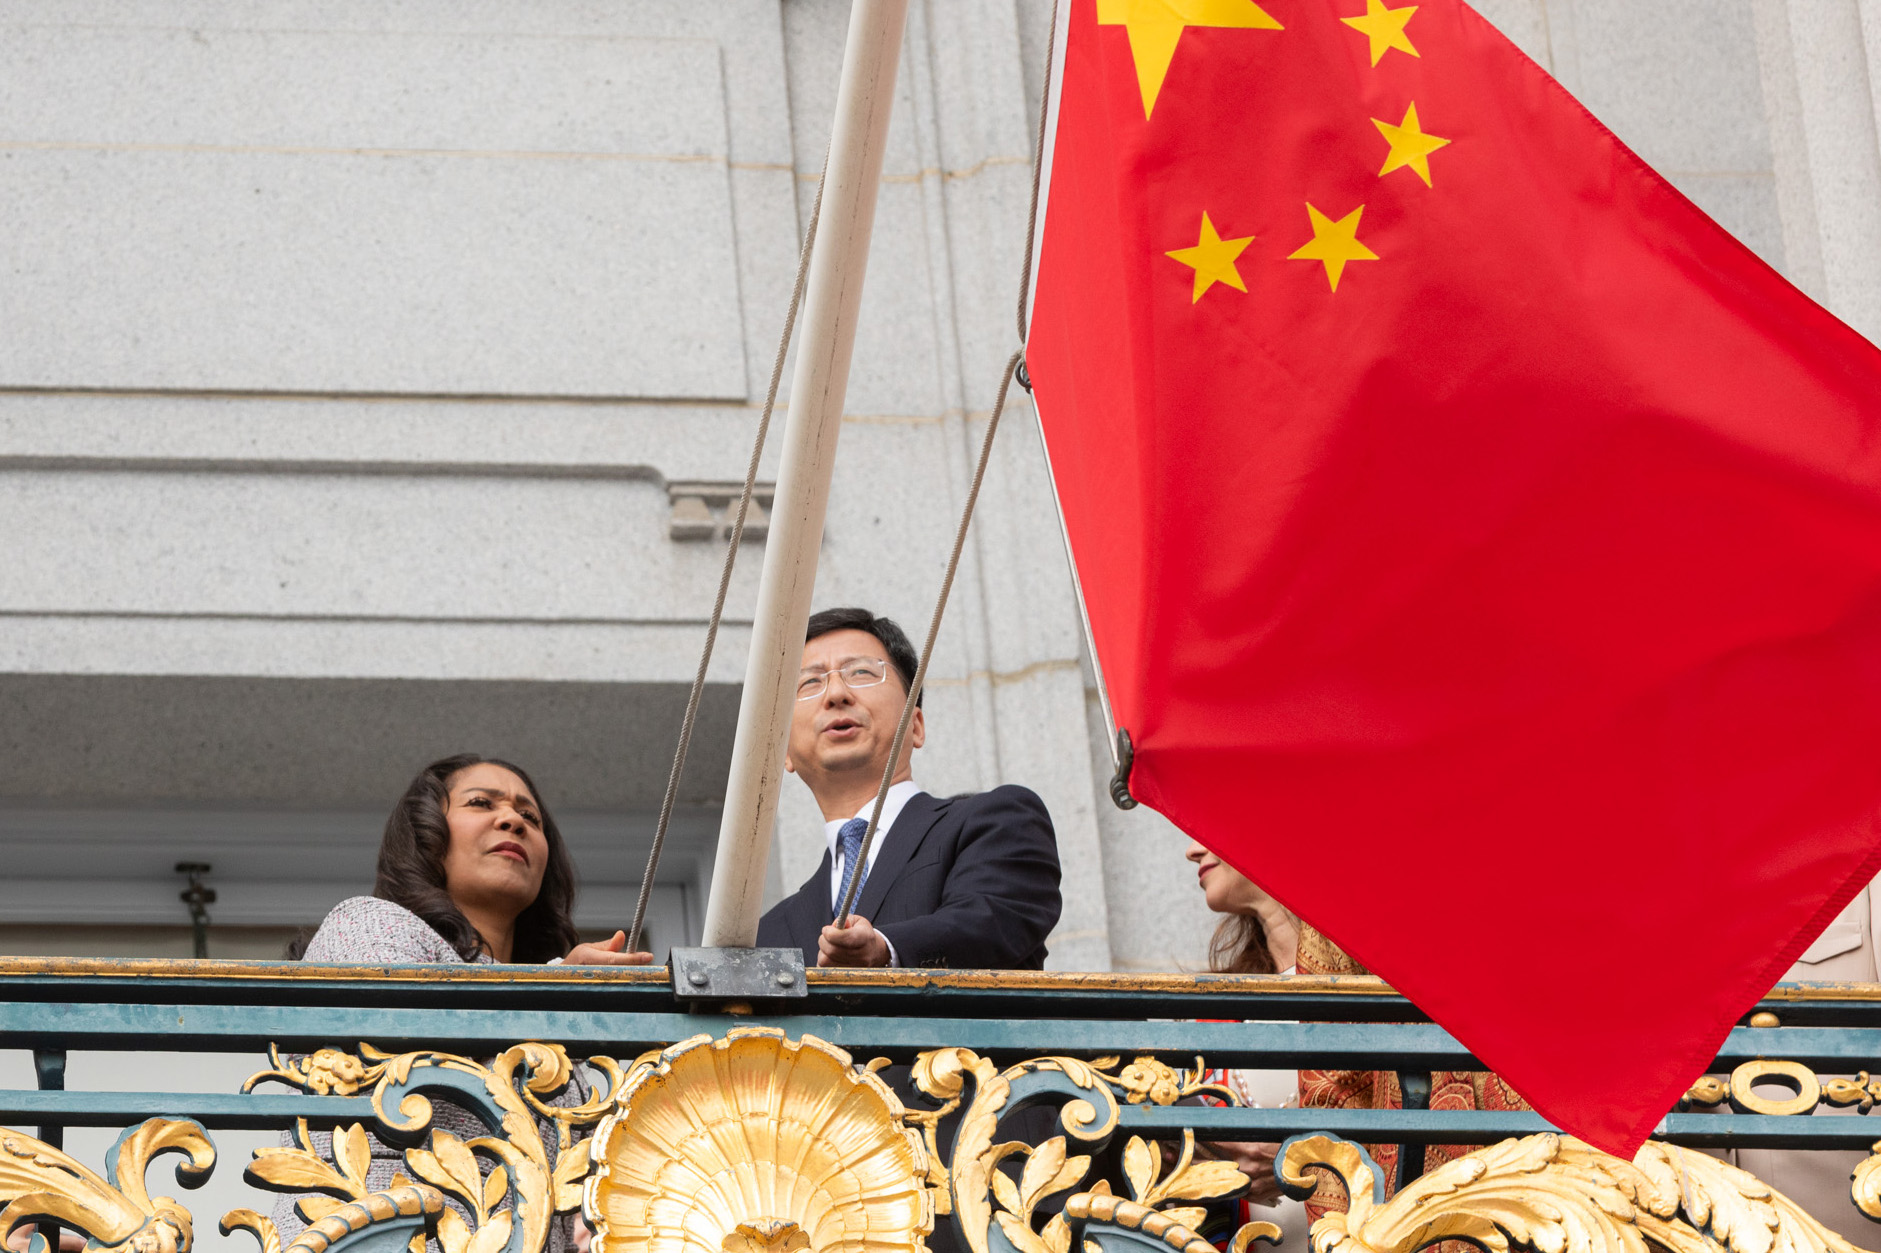 Two people stand behind a Chinese flag on a balcony with a decorative railing.